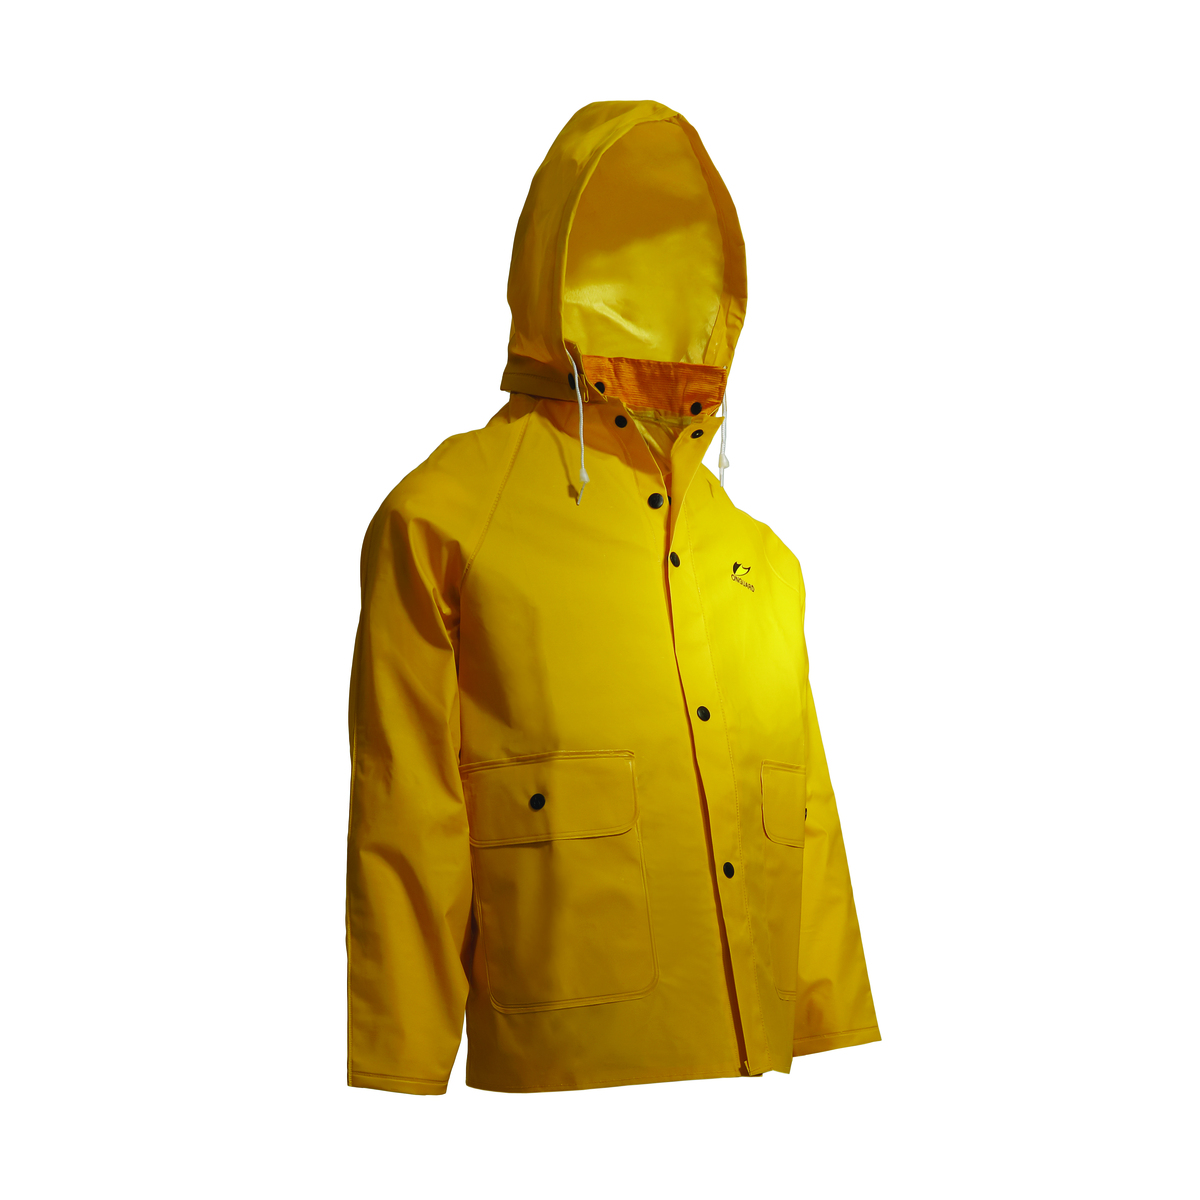 Dunlop® Protective Footwear X-Large Yellow Sitex .35 mm Polyester/PVC Rain Jacket With Detachable Hood